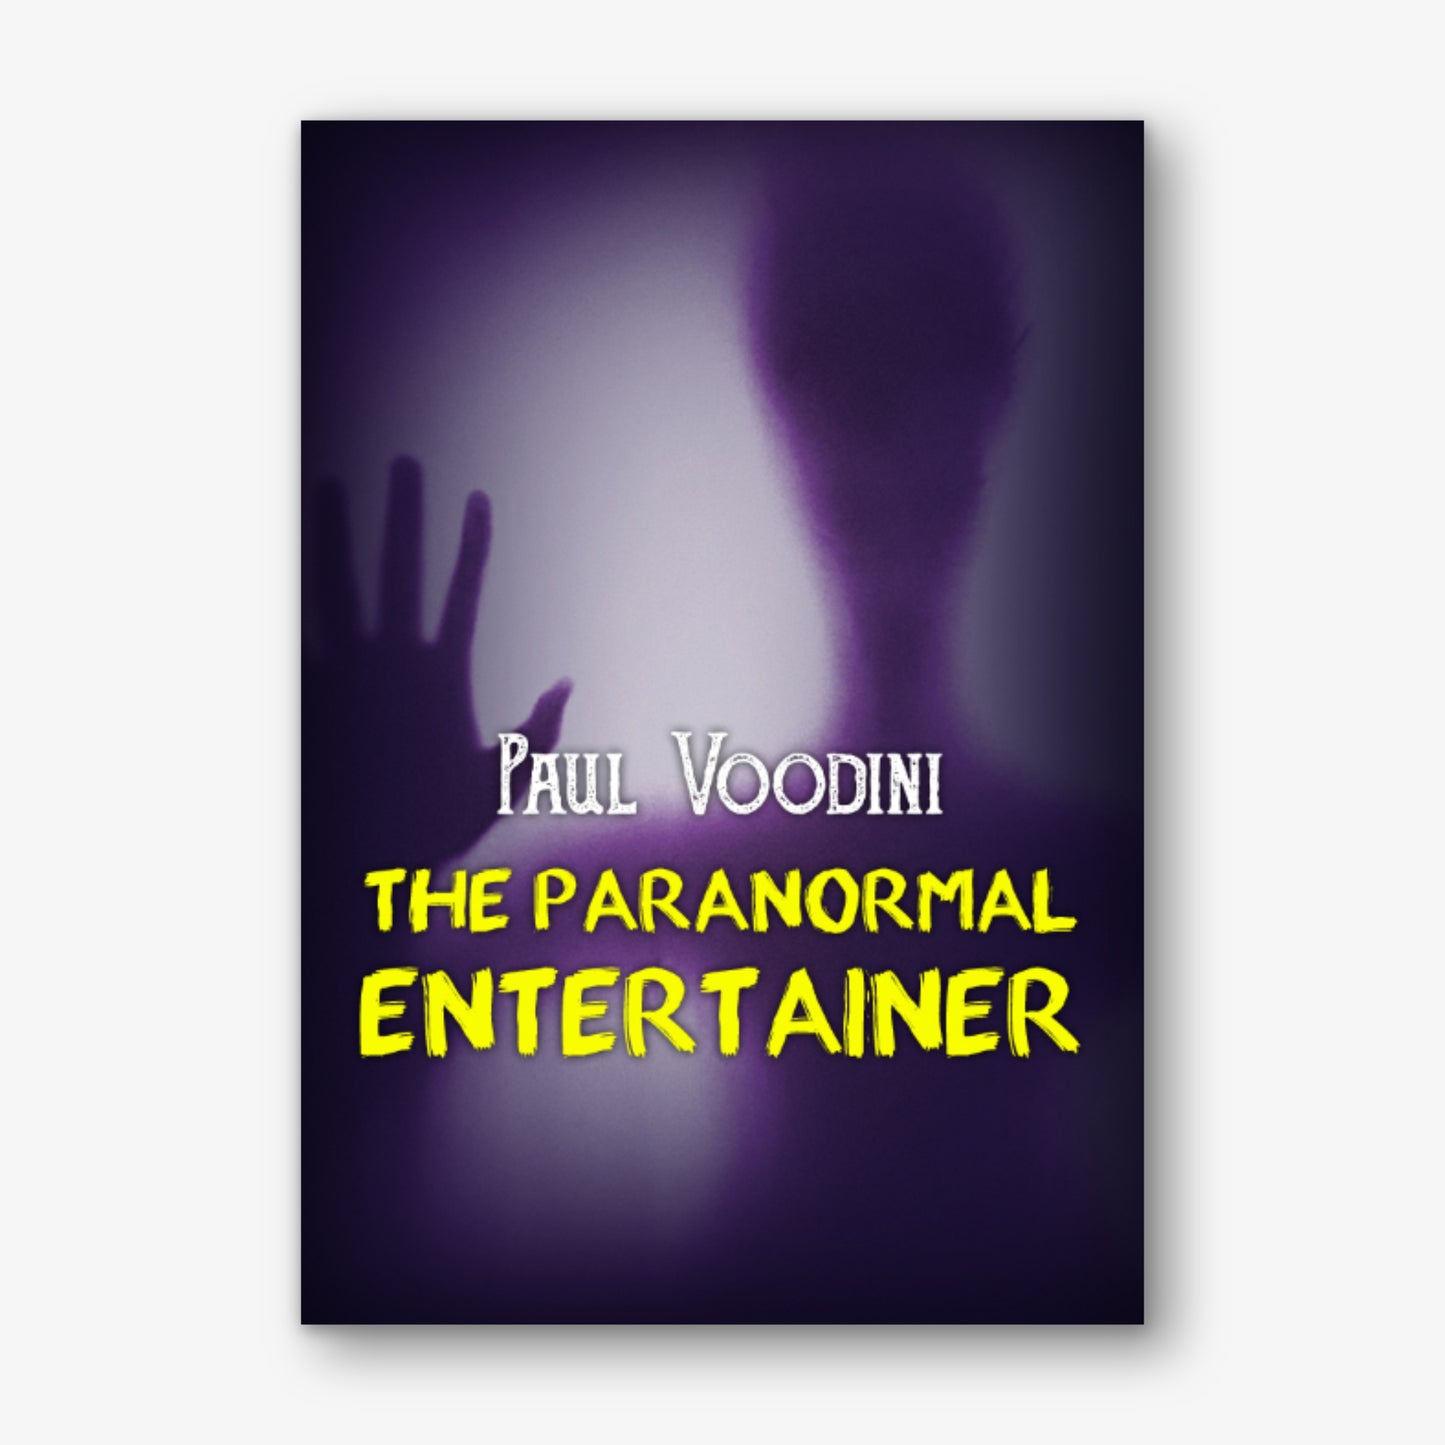 The Paranormal Entertainer by Paul Voodini